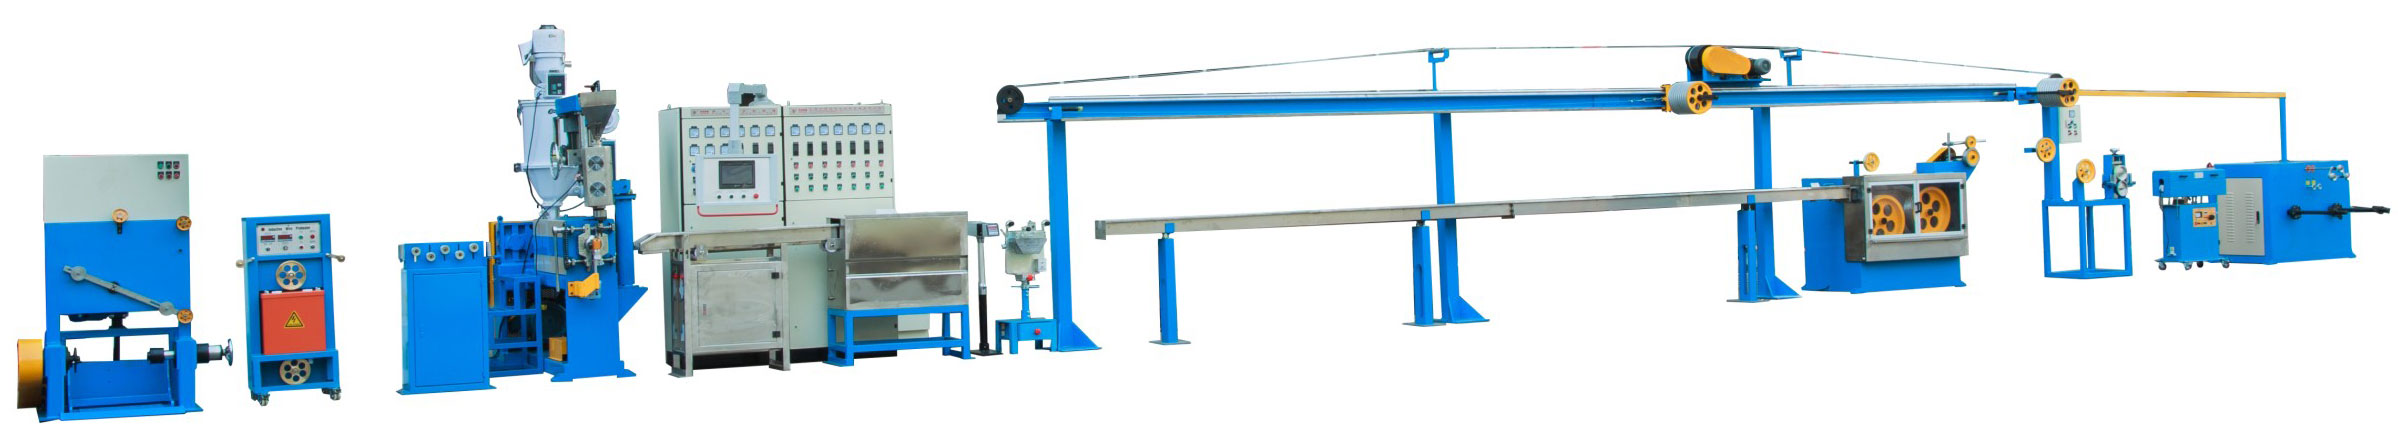 Electric-and-electronic-wire-extrusion-line.jpg